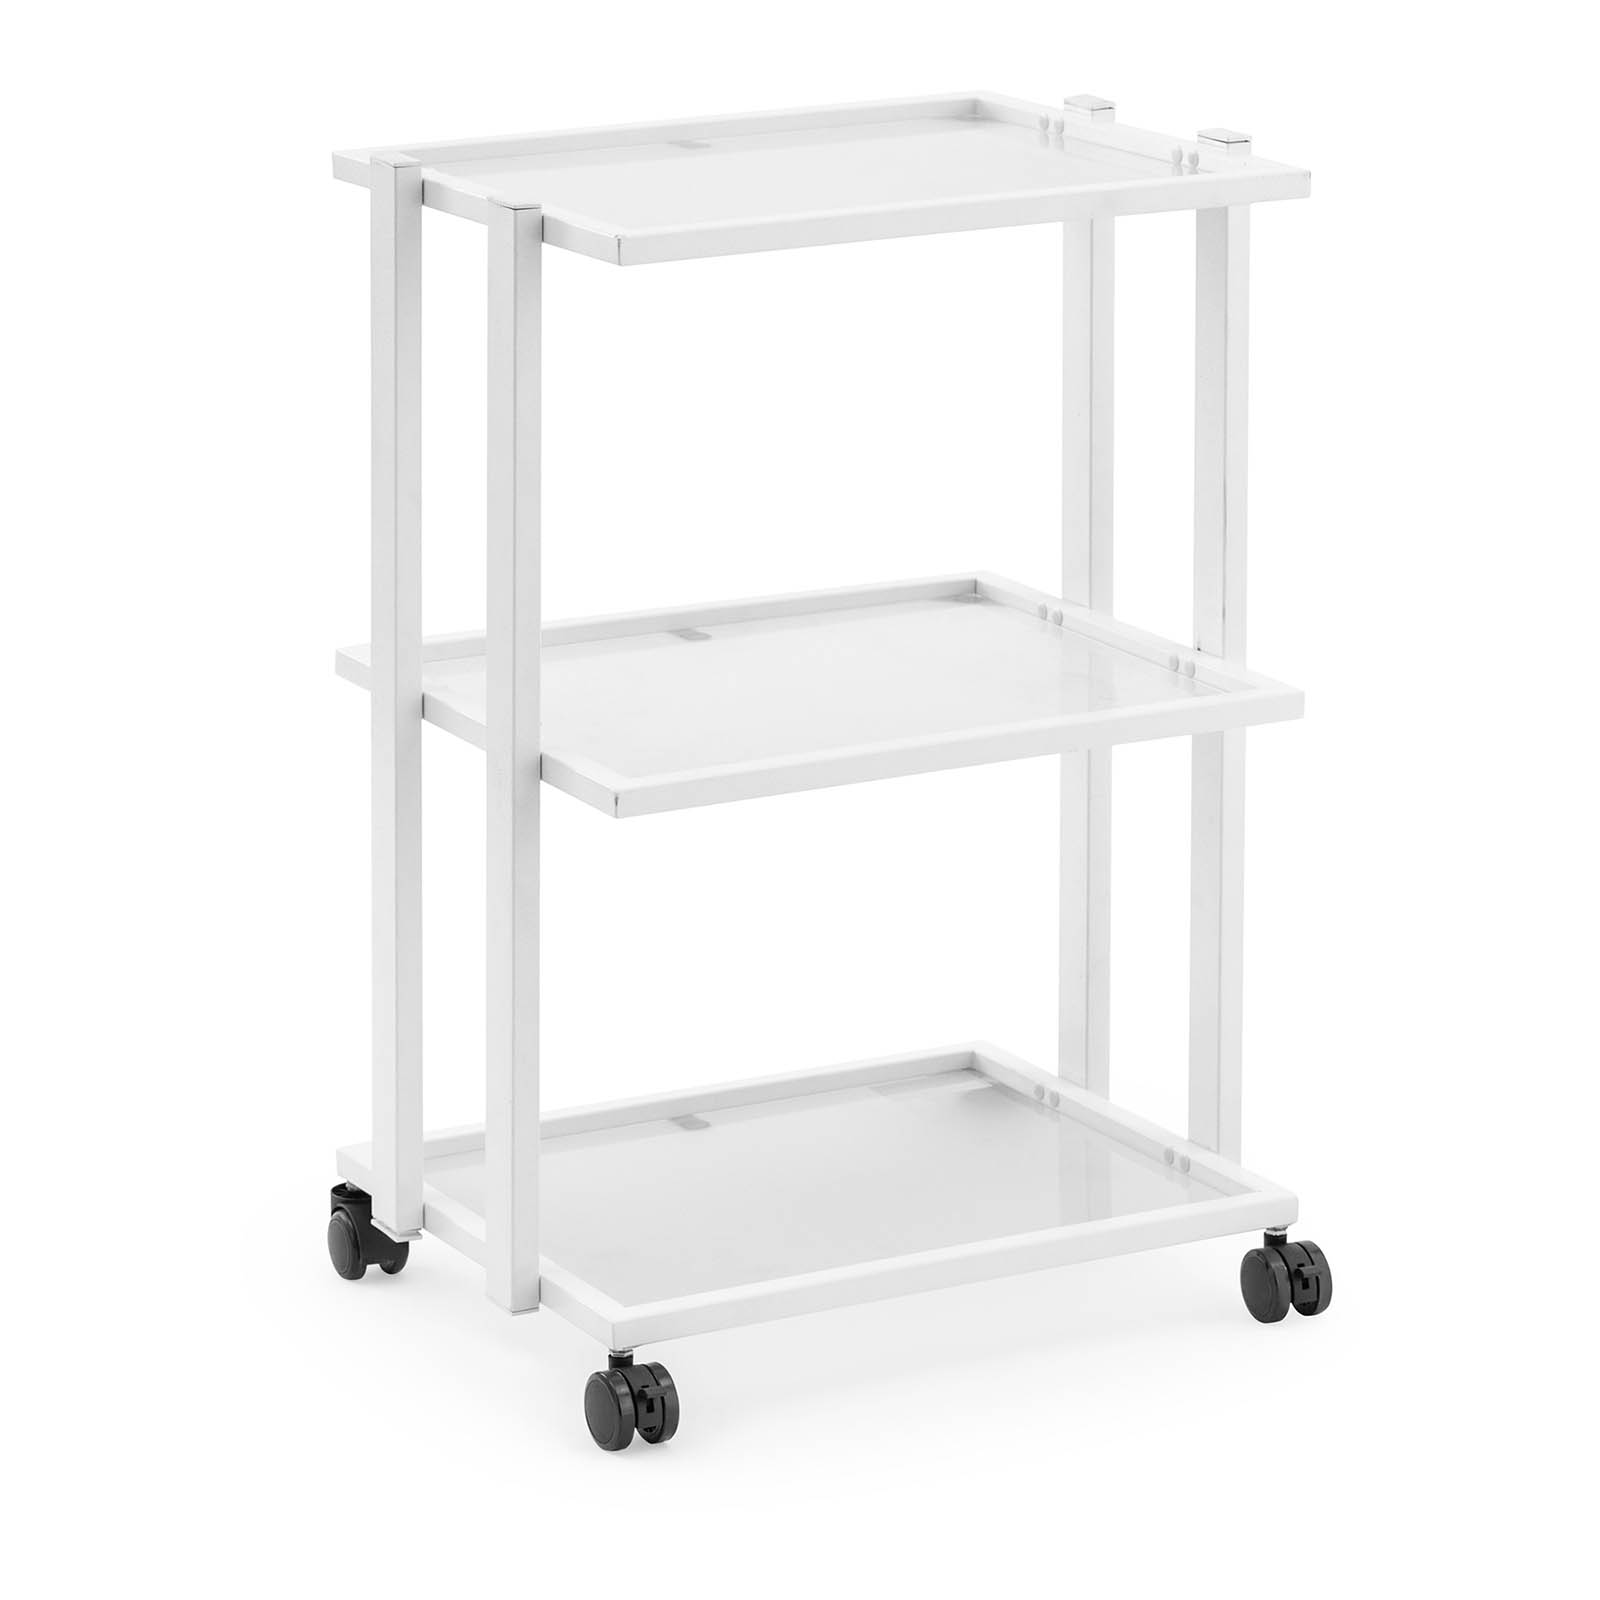 Cosmetic trolley - 3 Glass shelves - max. 60 kg